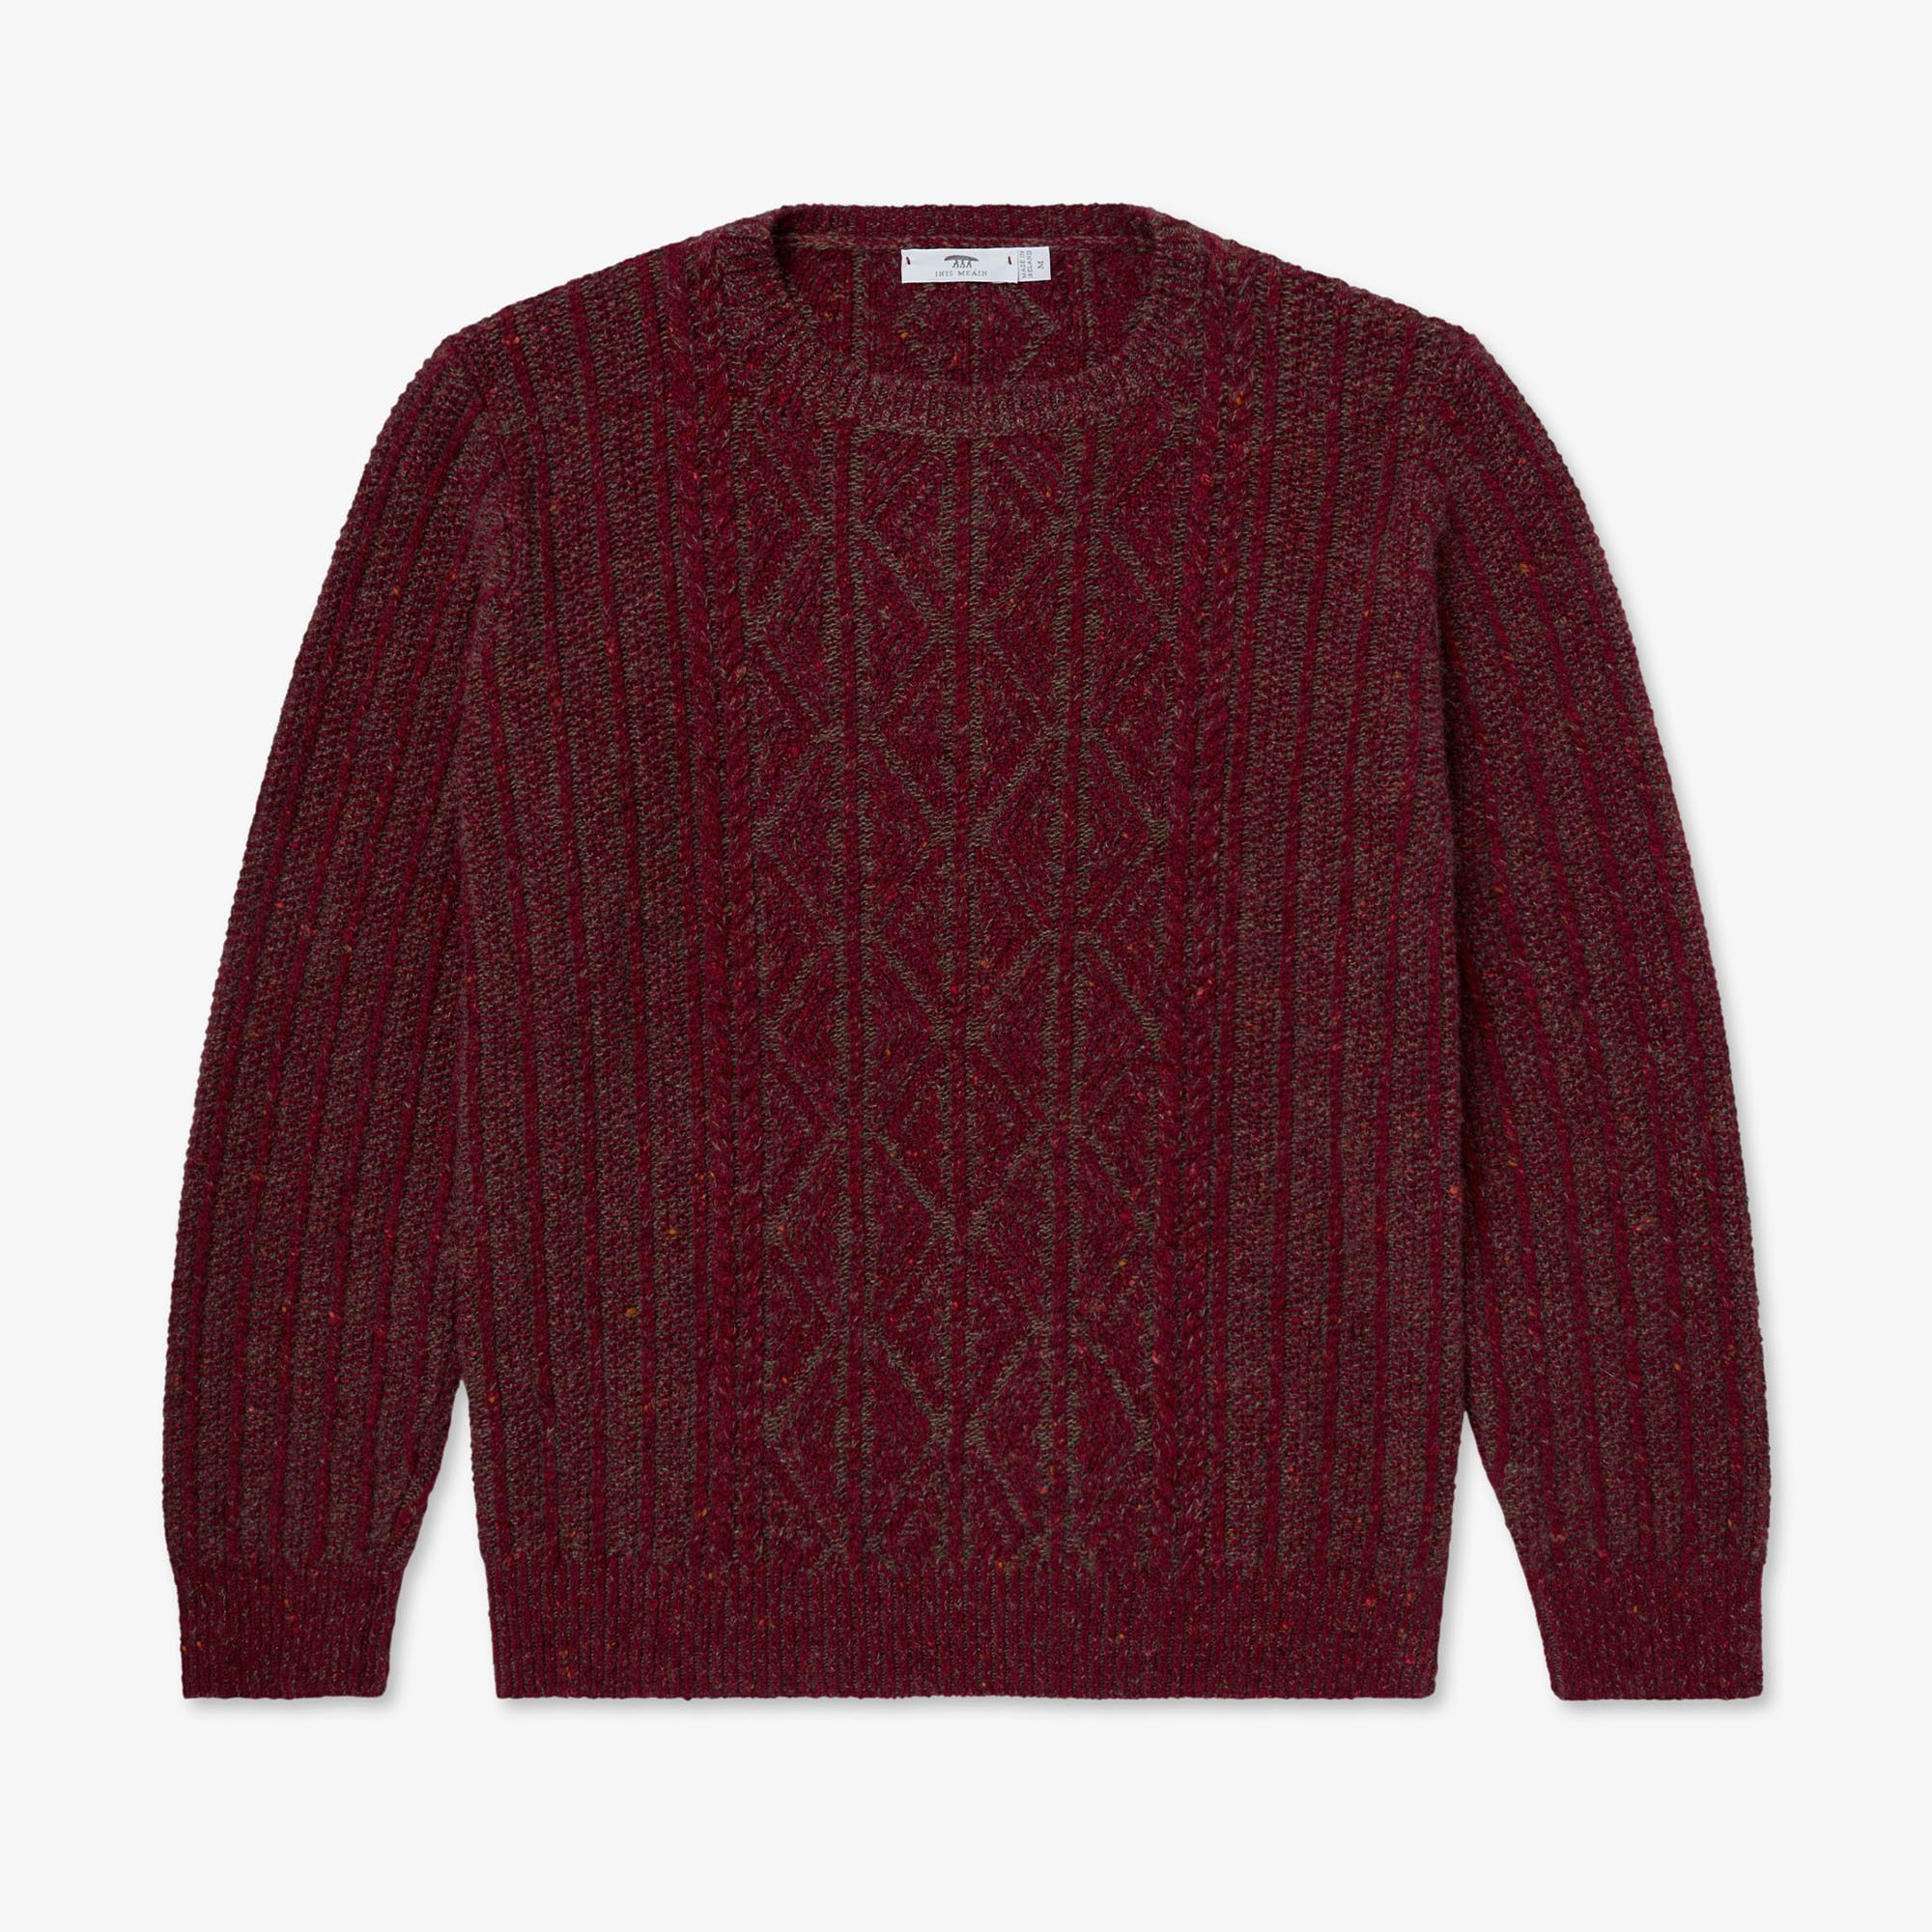 https://inismeain.ie/wp-content/uploads/2023/09/A2320_Inis_Meain_Cashmere_Patented_Aran_Sweater_Red_Mix_1x1_Product_1.jpg